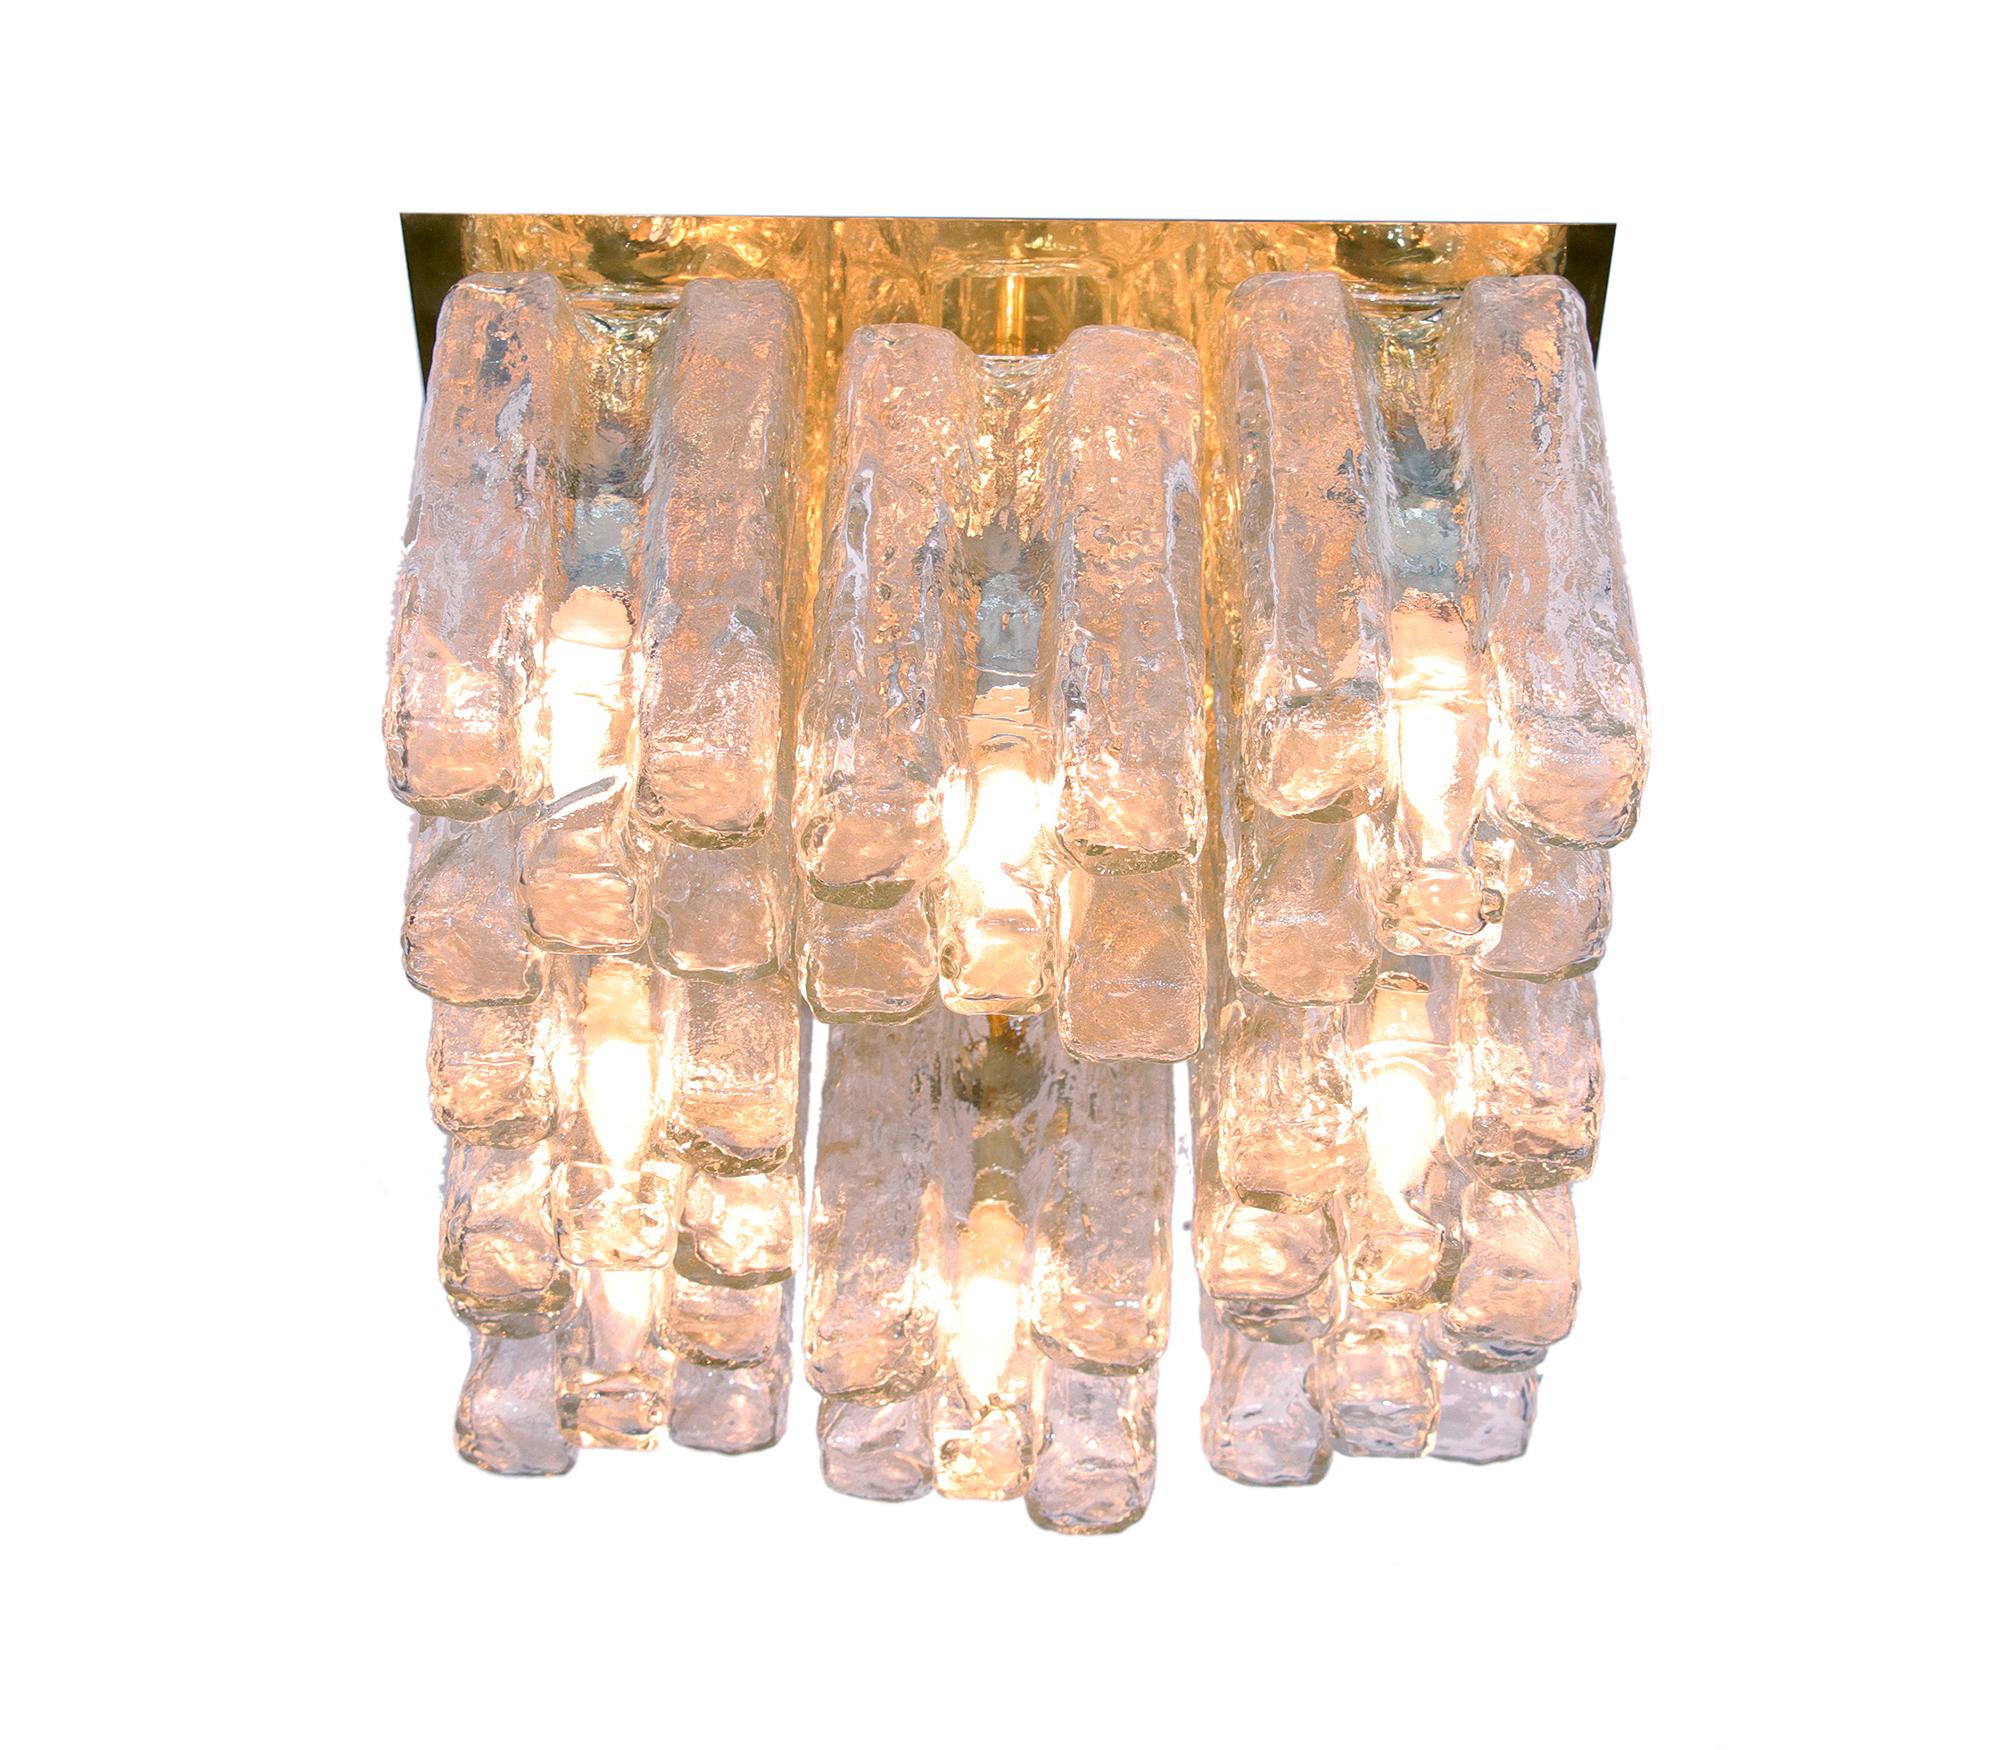 Elegant flush mount chandelier with Murano glass on a brass frame. Designed by J.T. Kalmar, model 'Granada'. Hanging glass resembles icicles. Chandelier illuminates beautifully and offers a lot of light. Manufactured by Kalmar, Vienna, Austria in